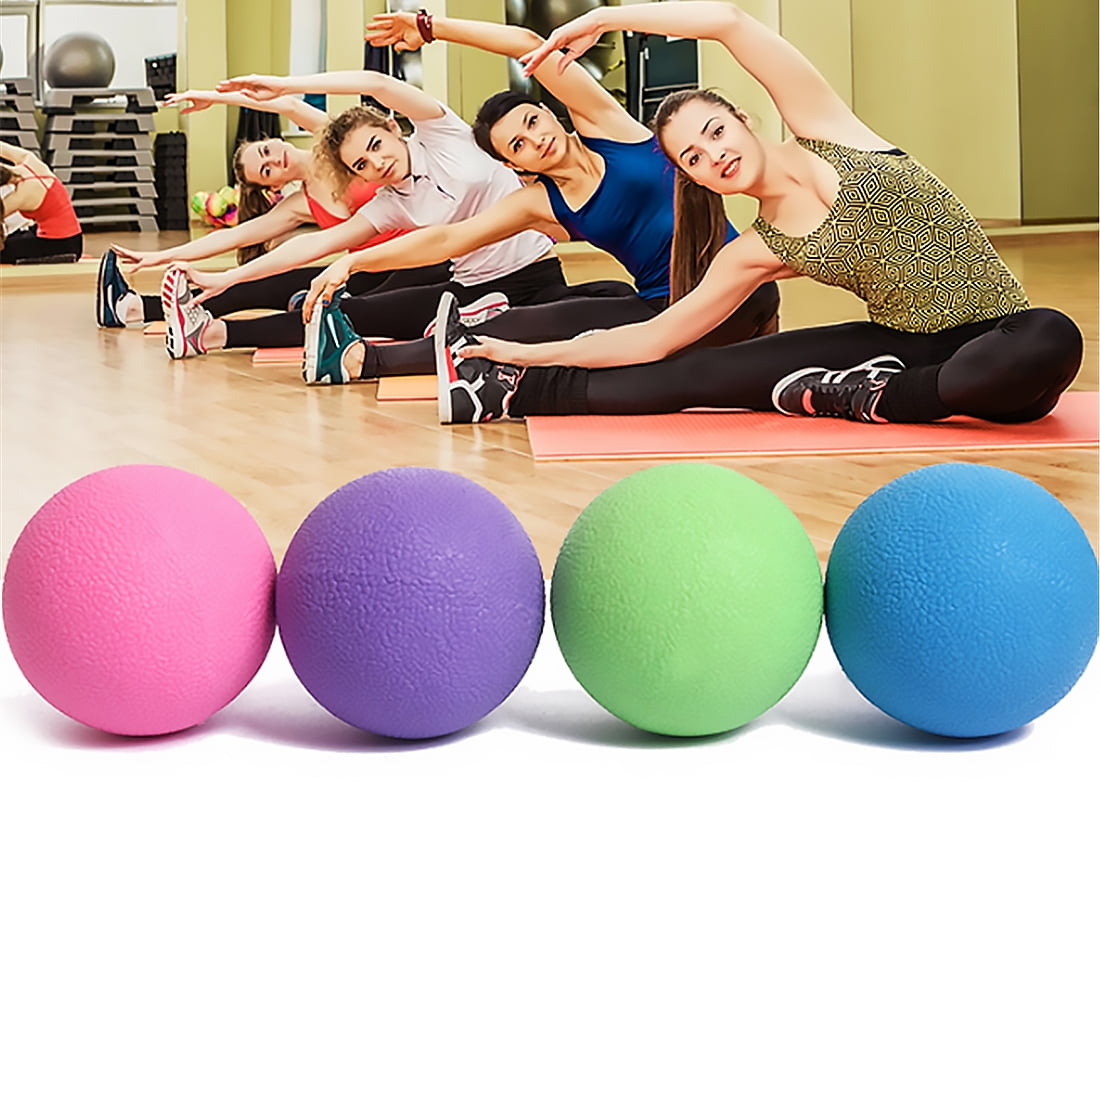 Lacrosse Ball Mobility Myofascial Trigger Point Release Body Massage Ball B nh 